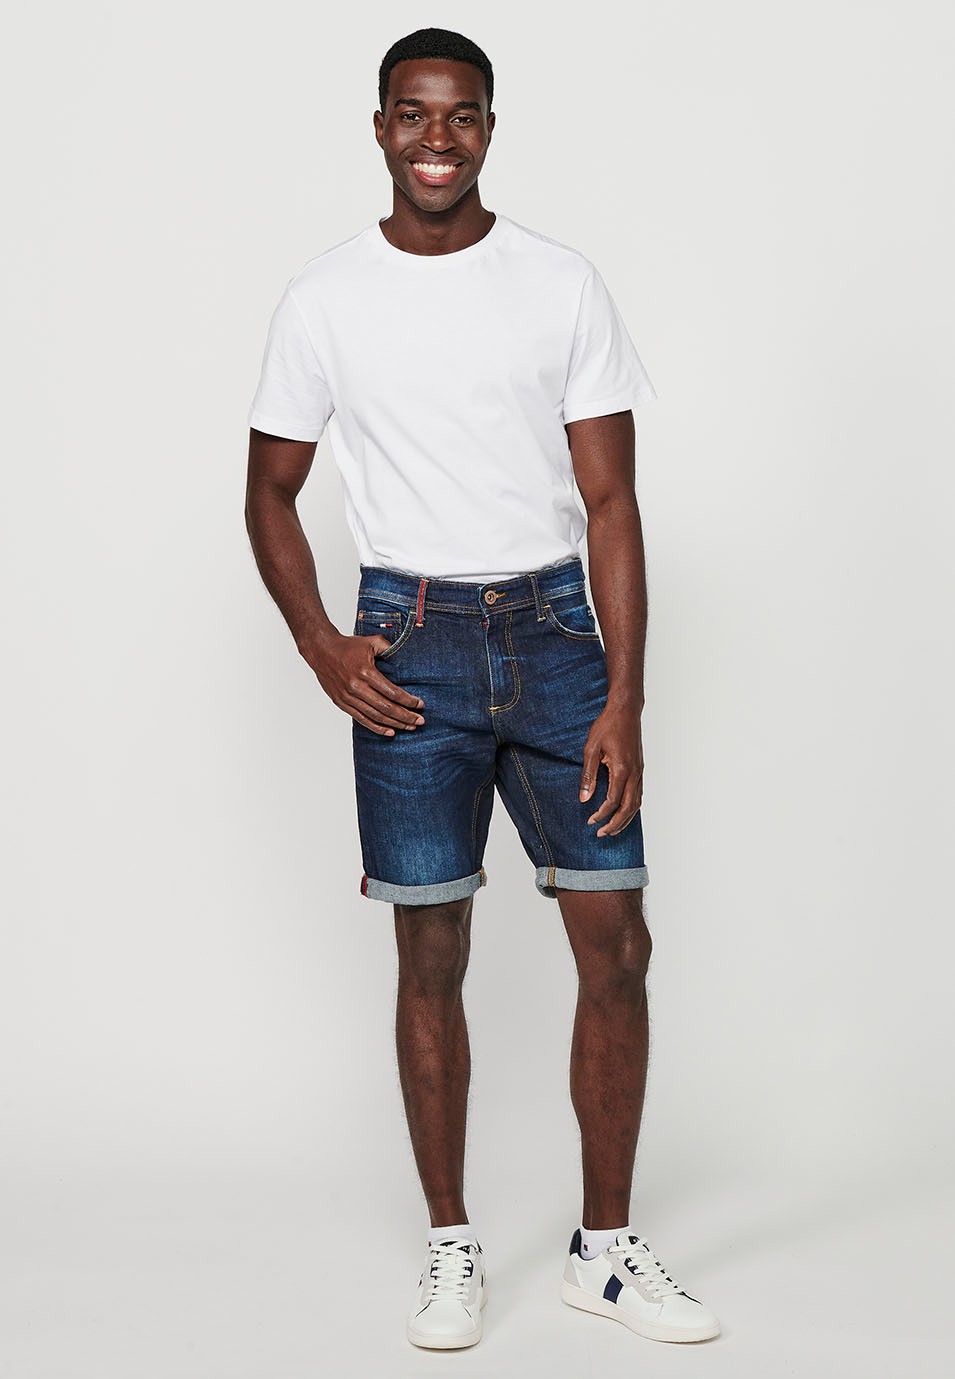 Shorts with turn-up finish and front zipper and button closure with five pockets, one blue pocket pocket for Men